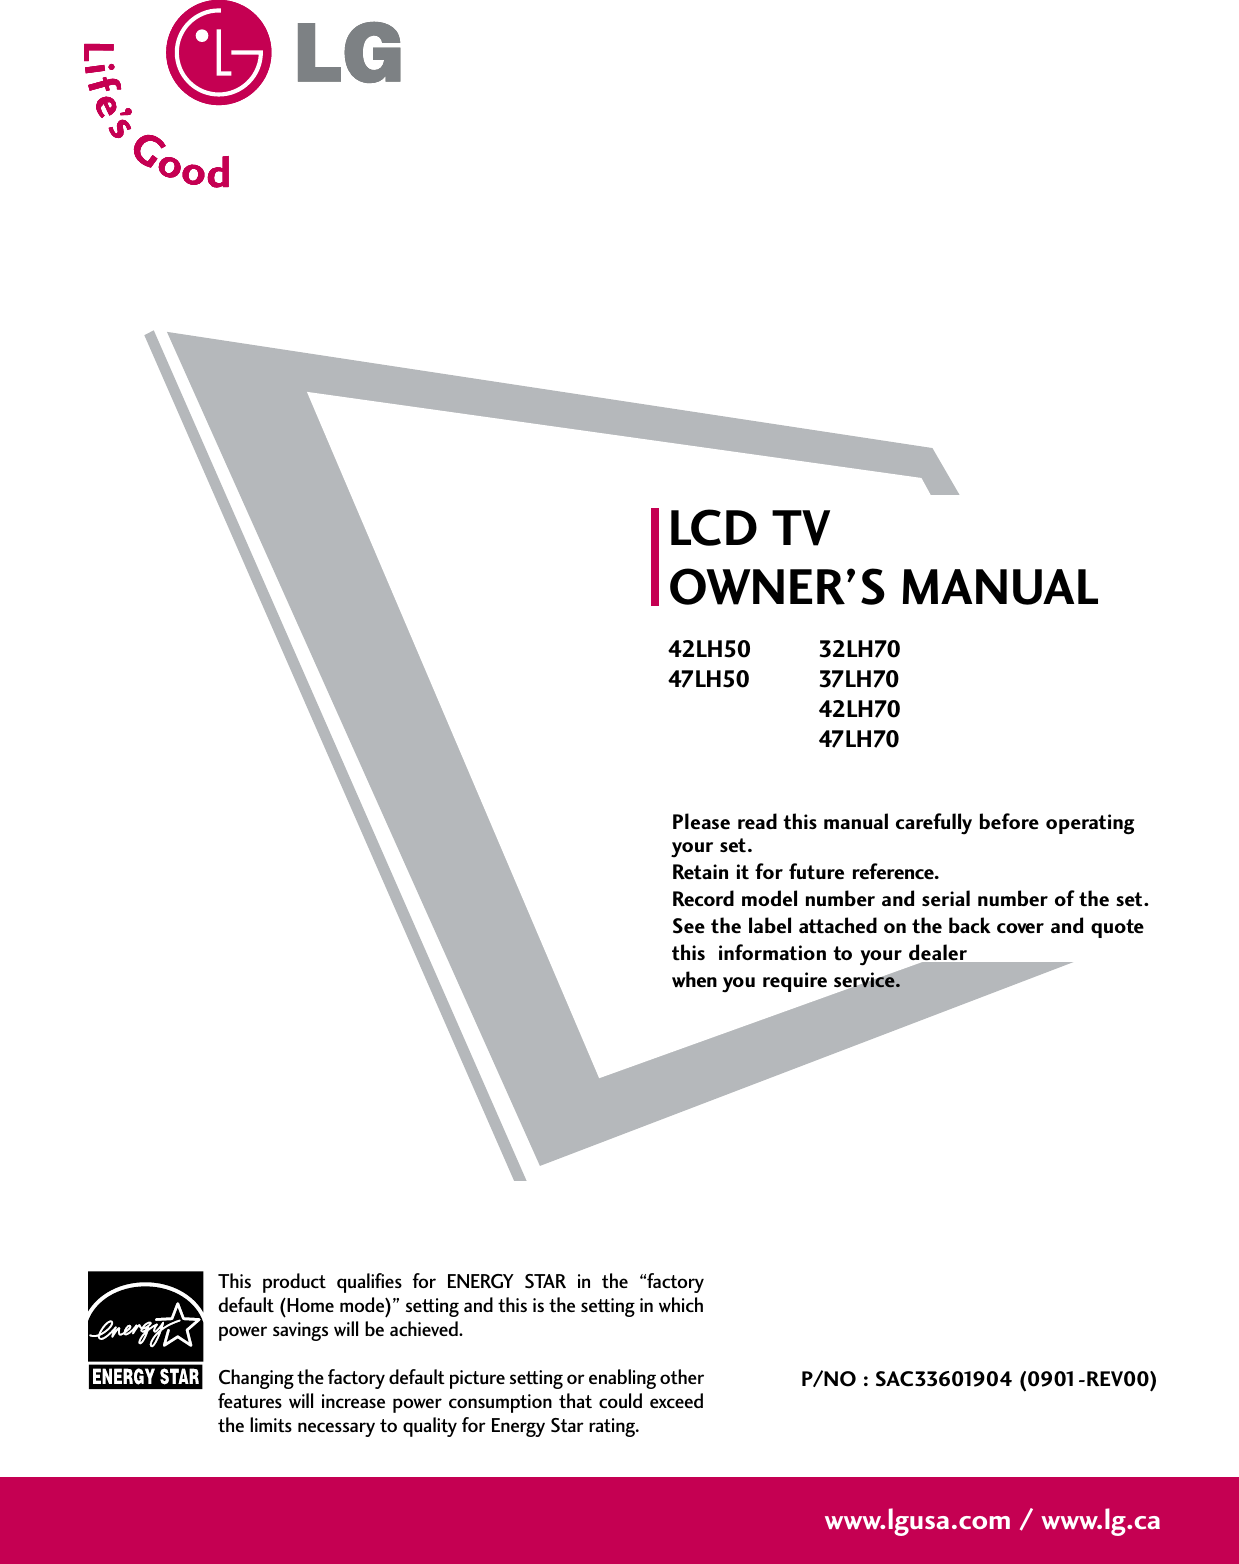 Please read this manual carefully before operatingyour set. Retain it for future reference.Record model number and serial number of the set. See the label attached on the back cover and quote this  information to your dealer when you require service.LCD TVOWNER’S MANUAL42LH5047LH5032LH7037LH7042LH7047LH70P/NO : SAC33601904 (0901-REV00)www.lgusa.com / www.lg.caThis product qualifies for ENERGY STAR in the “factorydefault (Home mode)” setting and this is the setting in whichpower savings will be achieved.Changing the factory default picture setting or enabling otherfeatures will increase power consumption that could exceedthe limits necessary to quality for Energy Star rating.